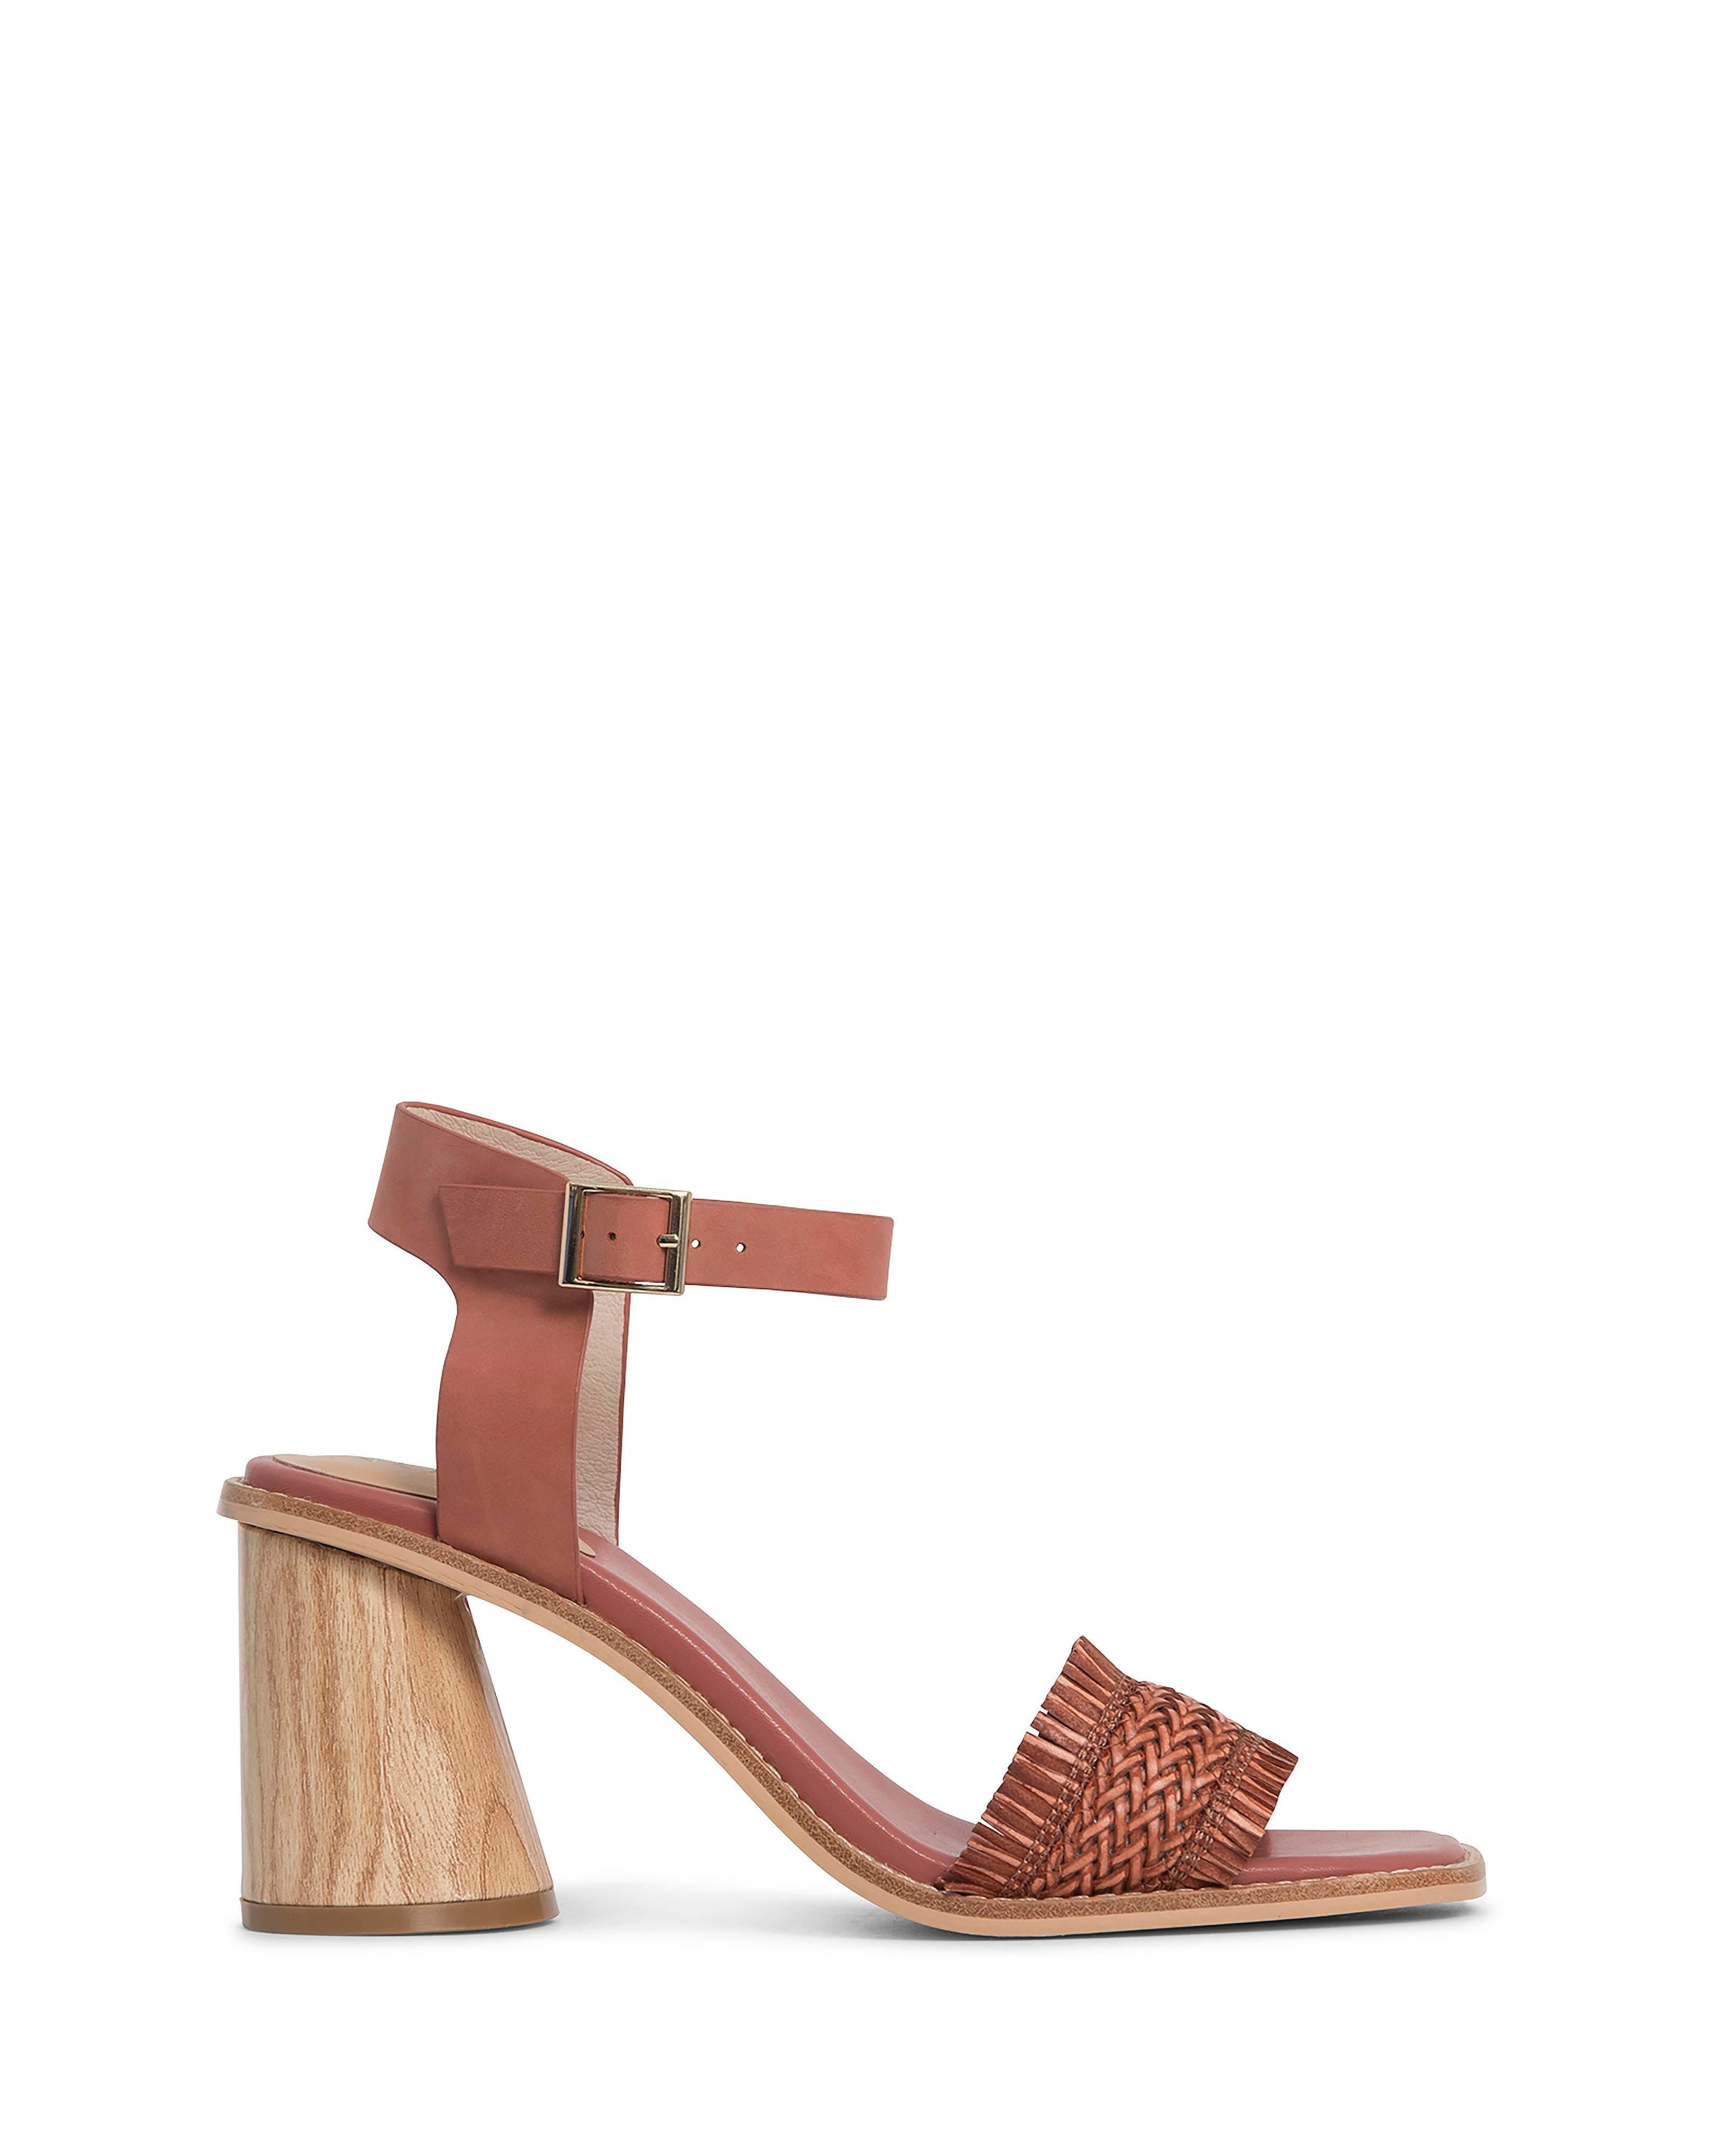 Henna Rosewood Weave Strap with 7.5cm Block Heel and Adjustable Gold Buckle